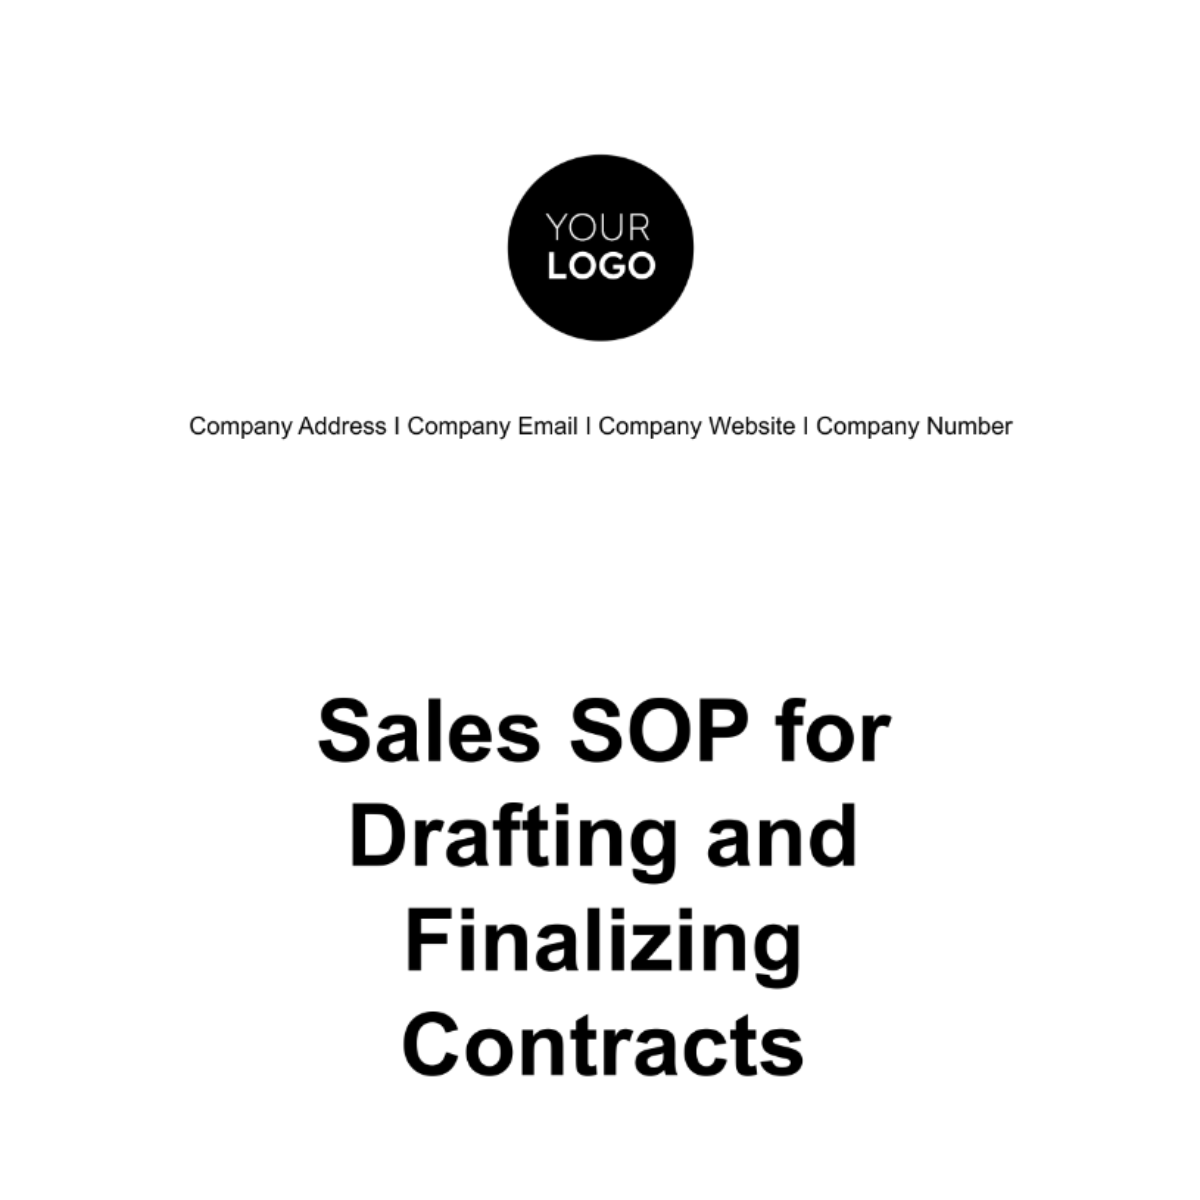 Free Sales SOP for Drafting and Finalizing Contracts Template